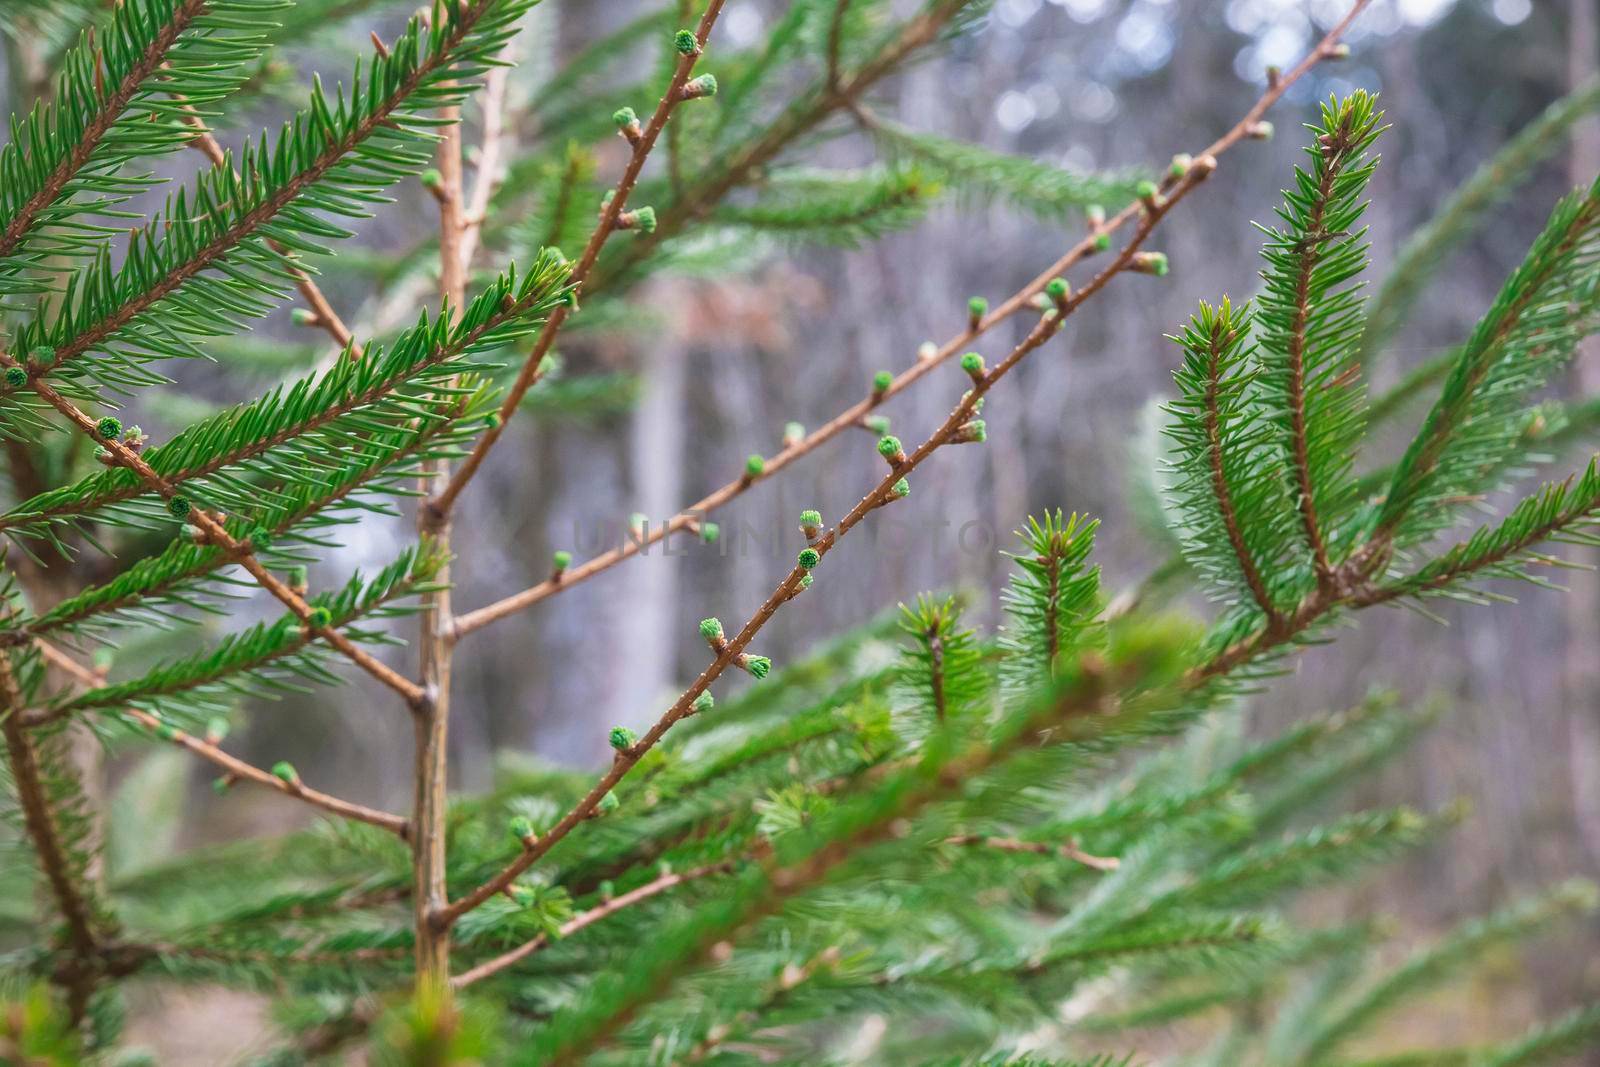 Young sprouts of a Christmas tree in the spring forest.